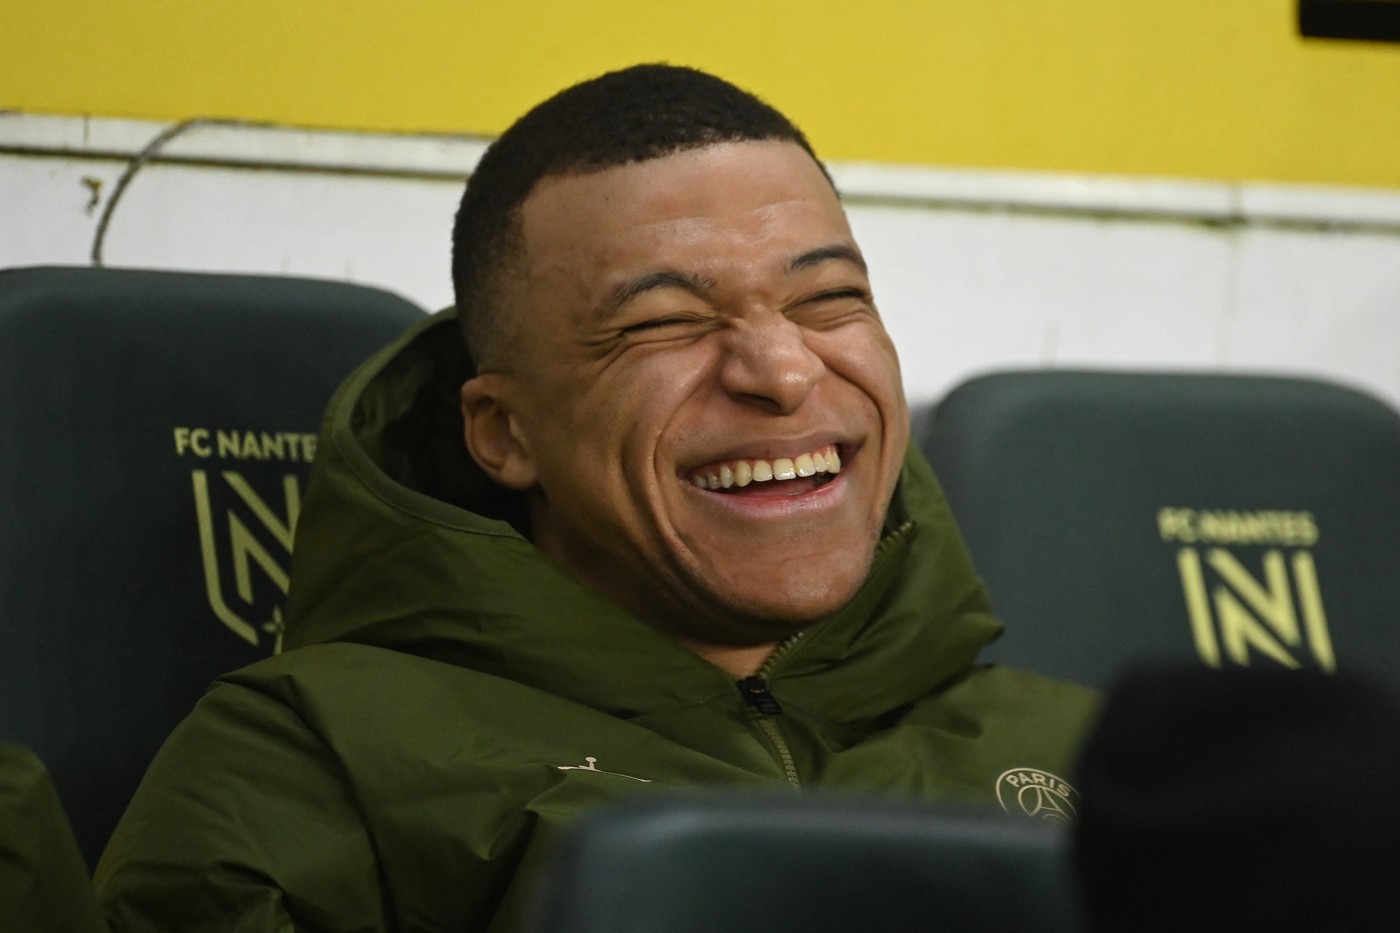 Paris Saint-Germain's French forward #07 Kylian Mbappe smiles prior to the French L1 football match between FC Nantes and Paris Saint-Germain (PSG) at the La Beaujoire stadium in Nantes, western France, on February 17, 2024.,Image: 847709676, License: Rights-managed, Restrictions: , Model Release: no